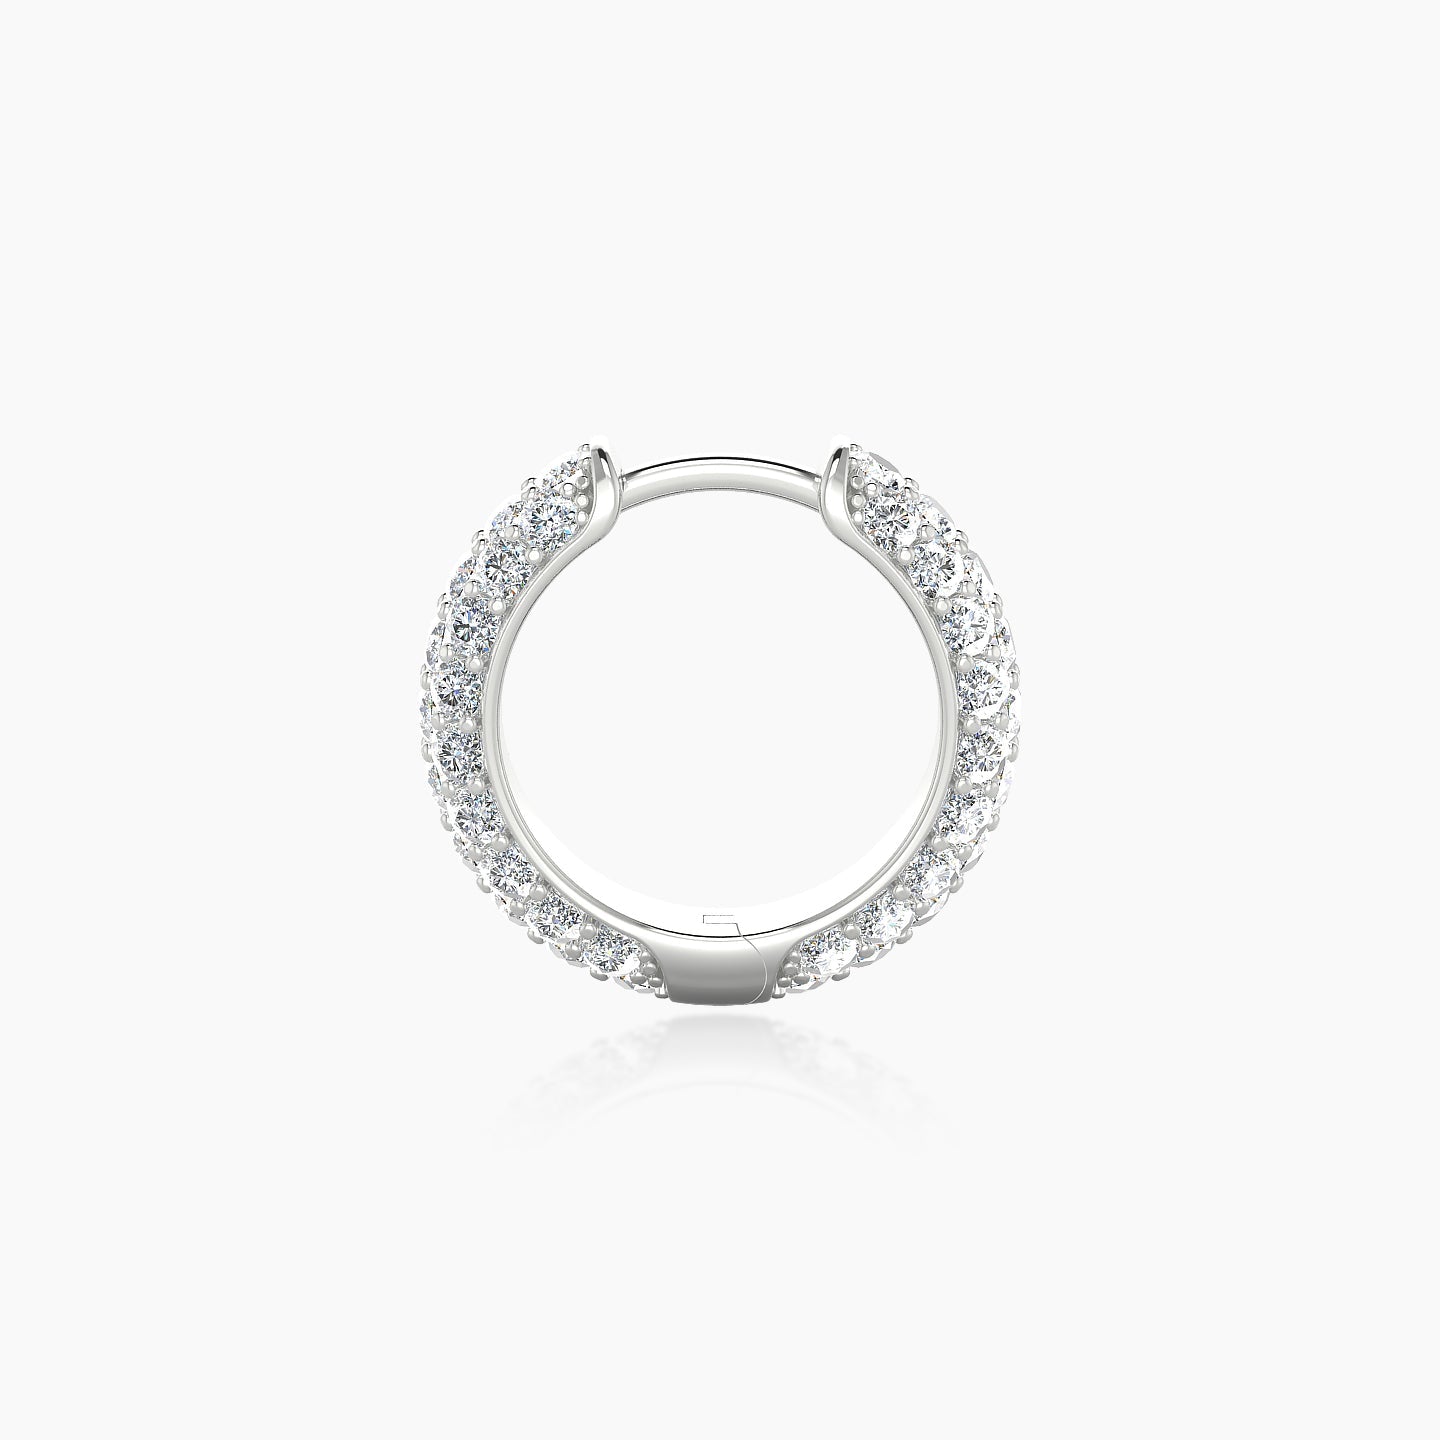 Theia | 18k White Gold 8 mm Pave Diamond Nose Ring Piercing